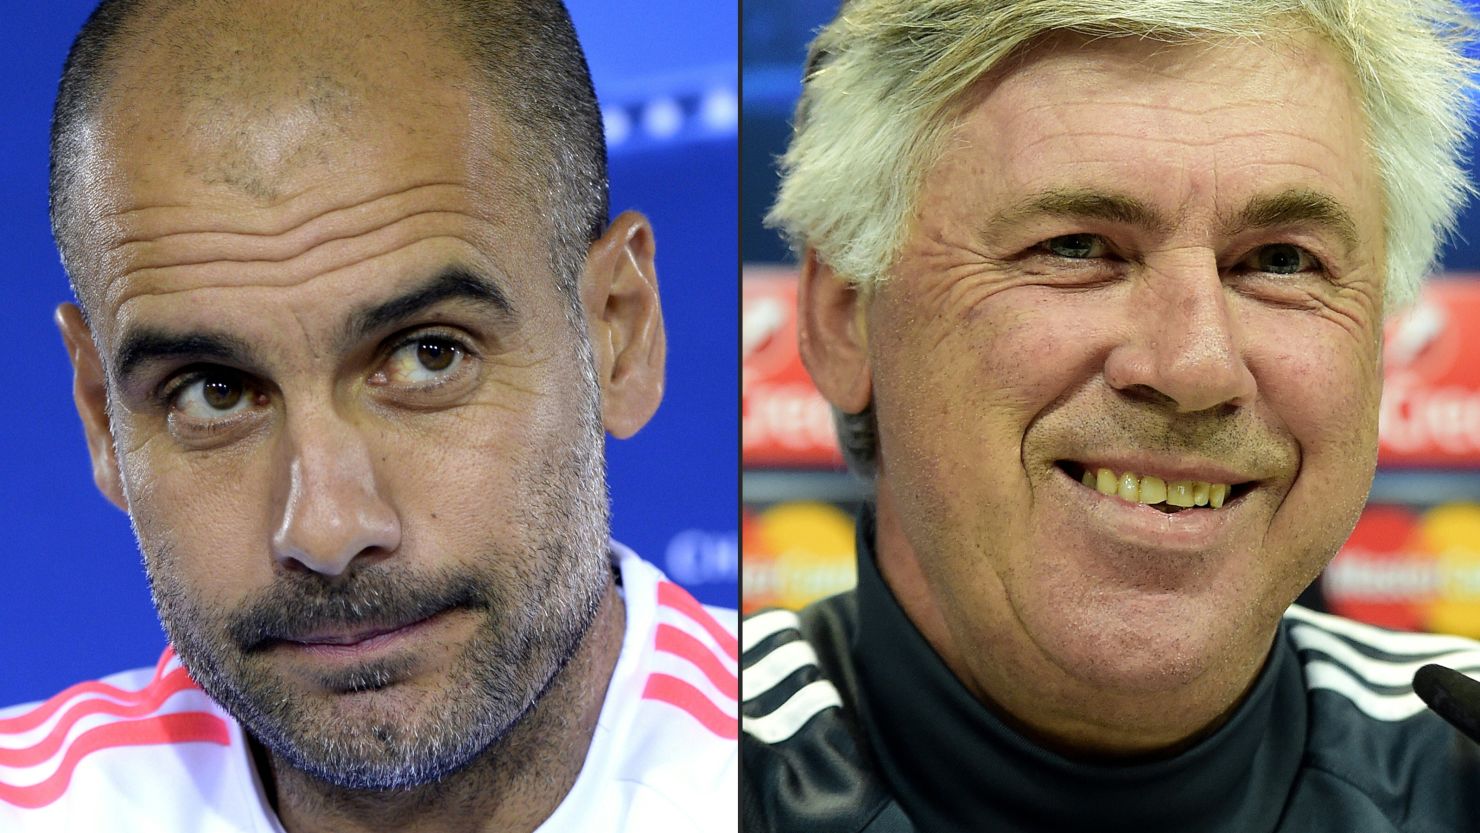 Bayern Munich turned to Carlo Ancelotti (right) after Pep Guardiola decided not to extend his contract.